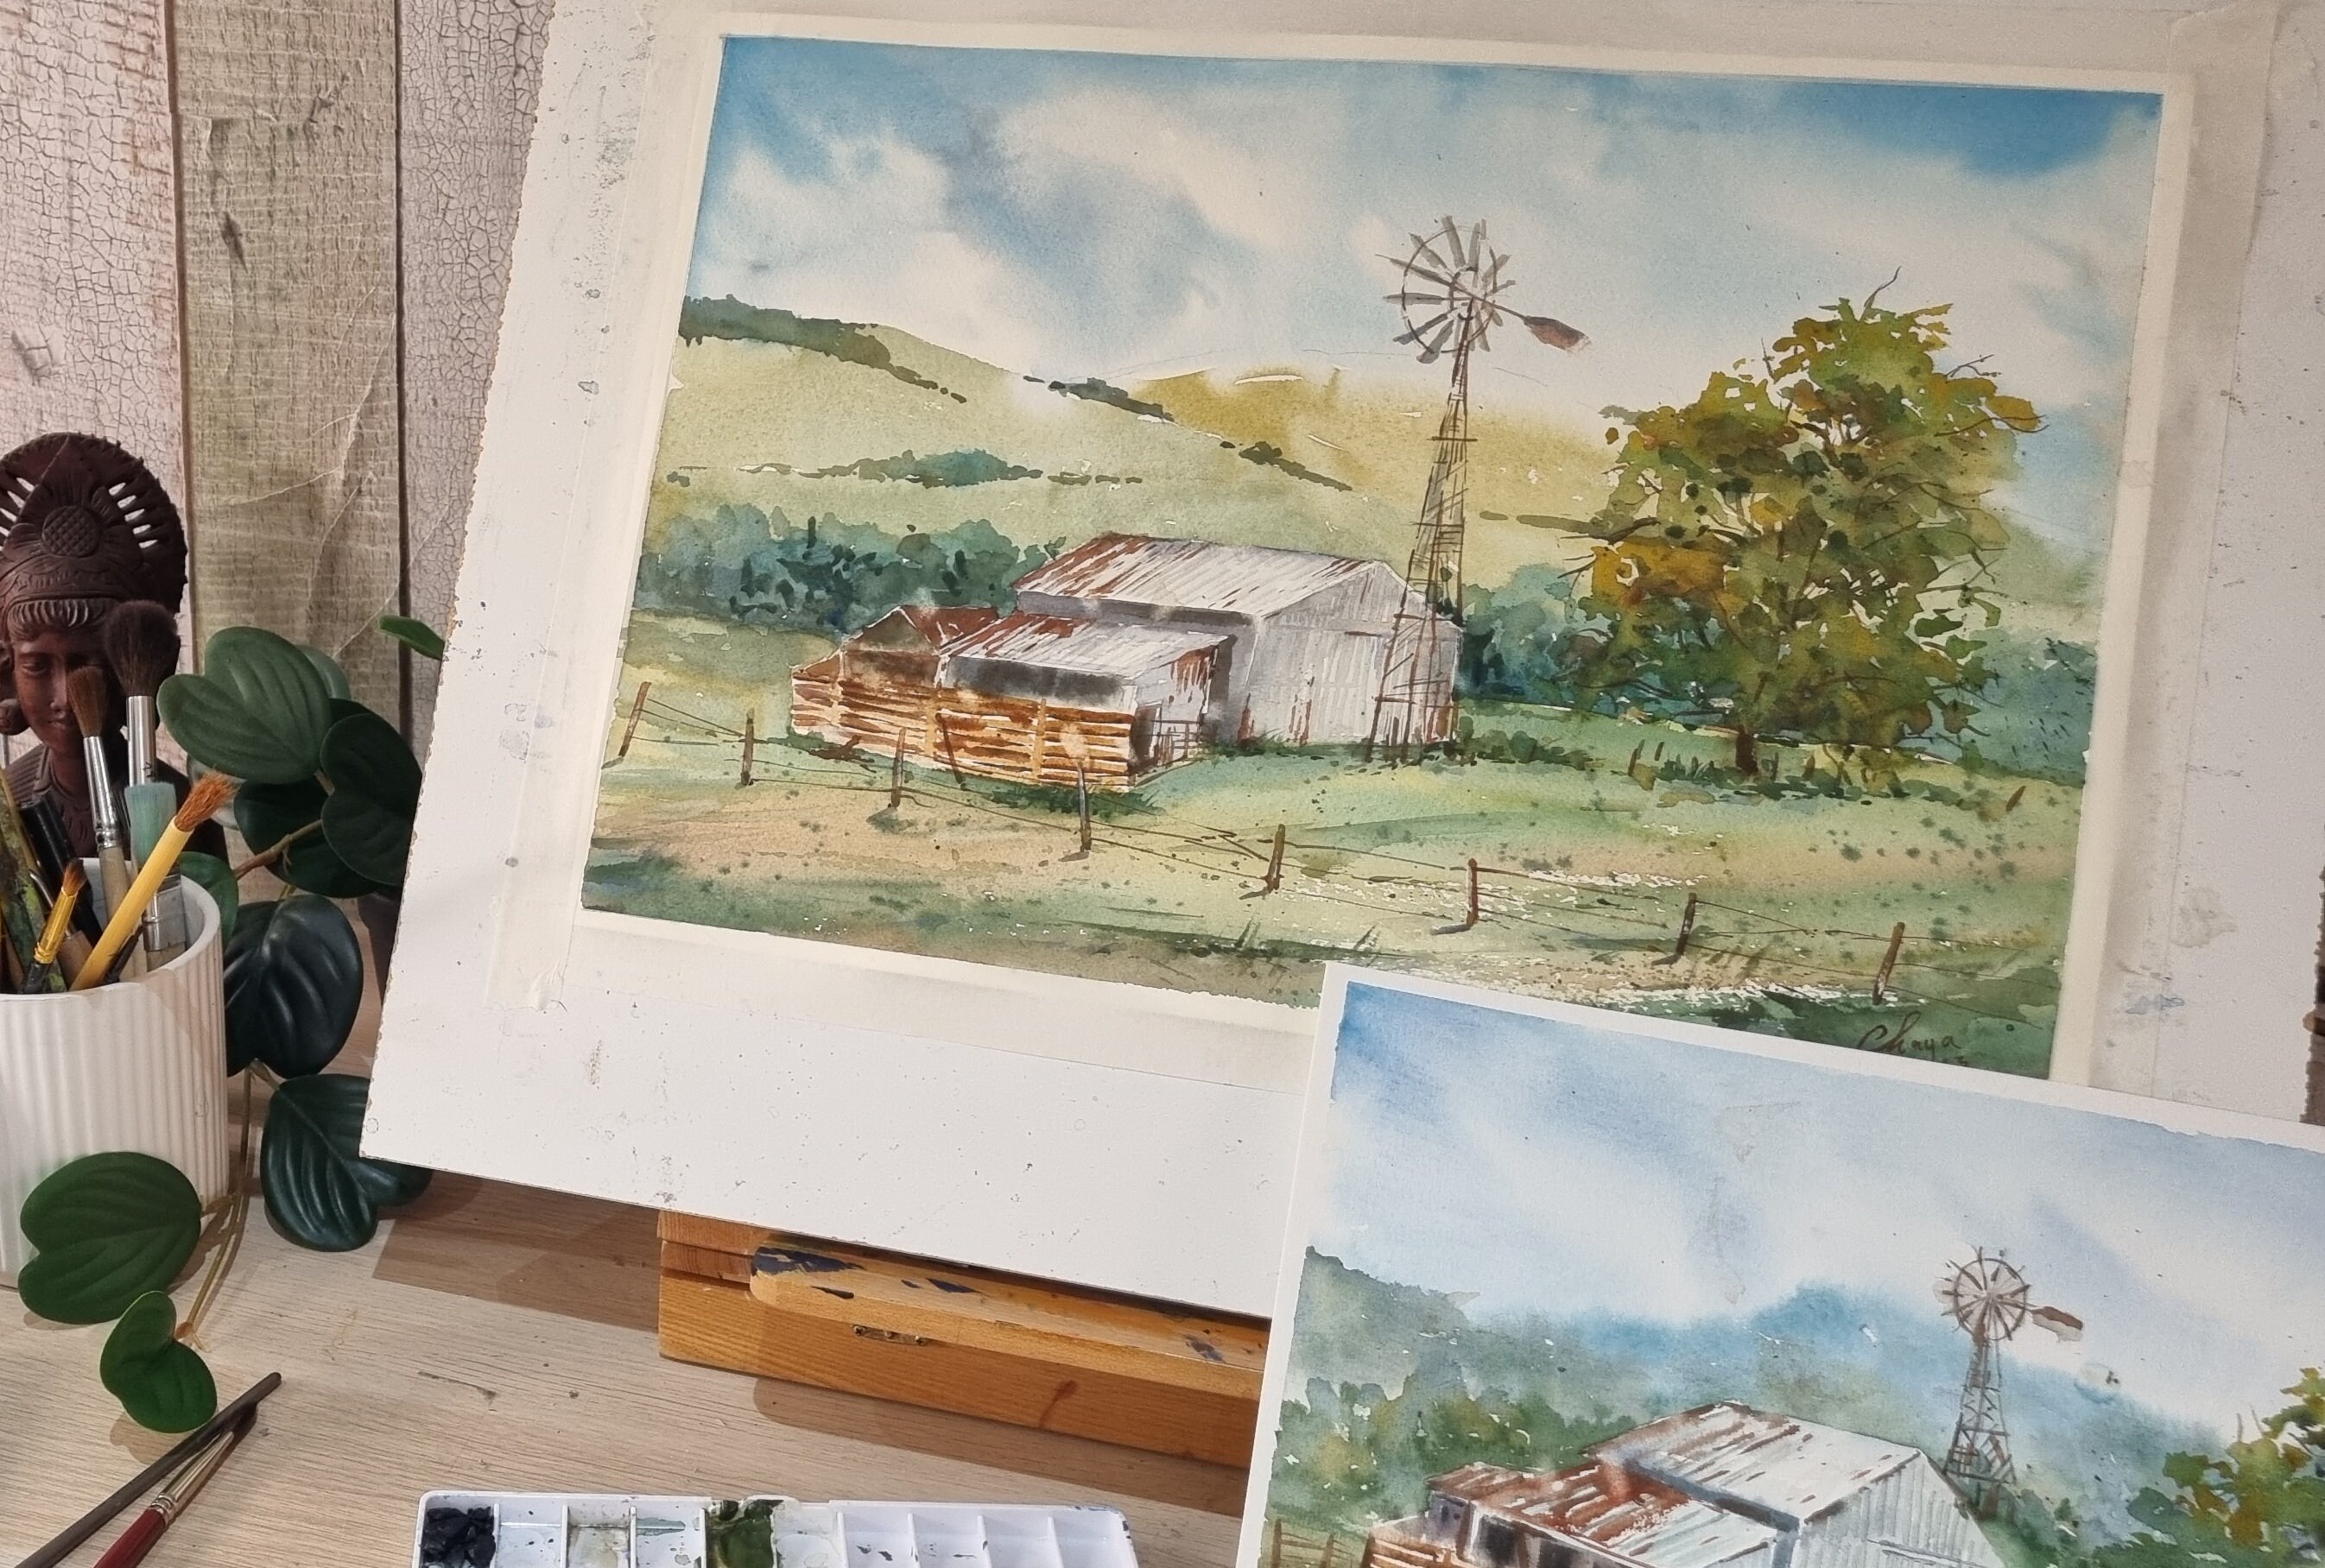 Watercolors Landscapes Made Simple — Nicki Traikos, life i design